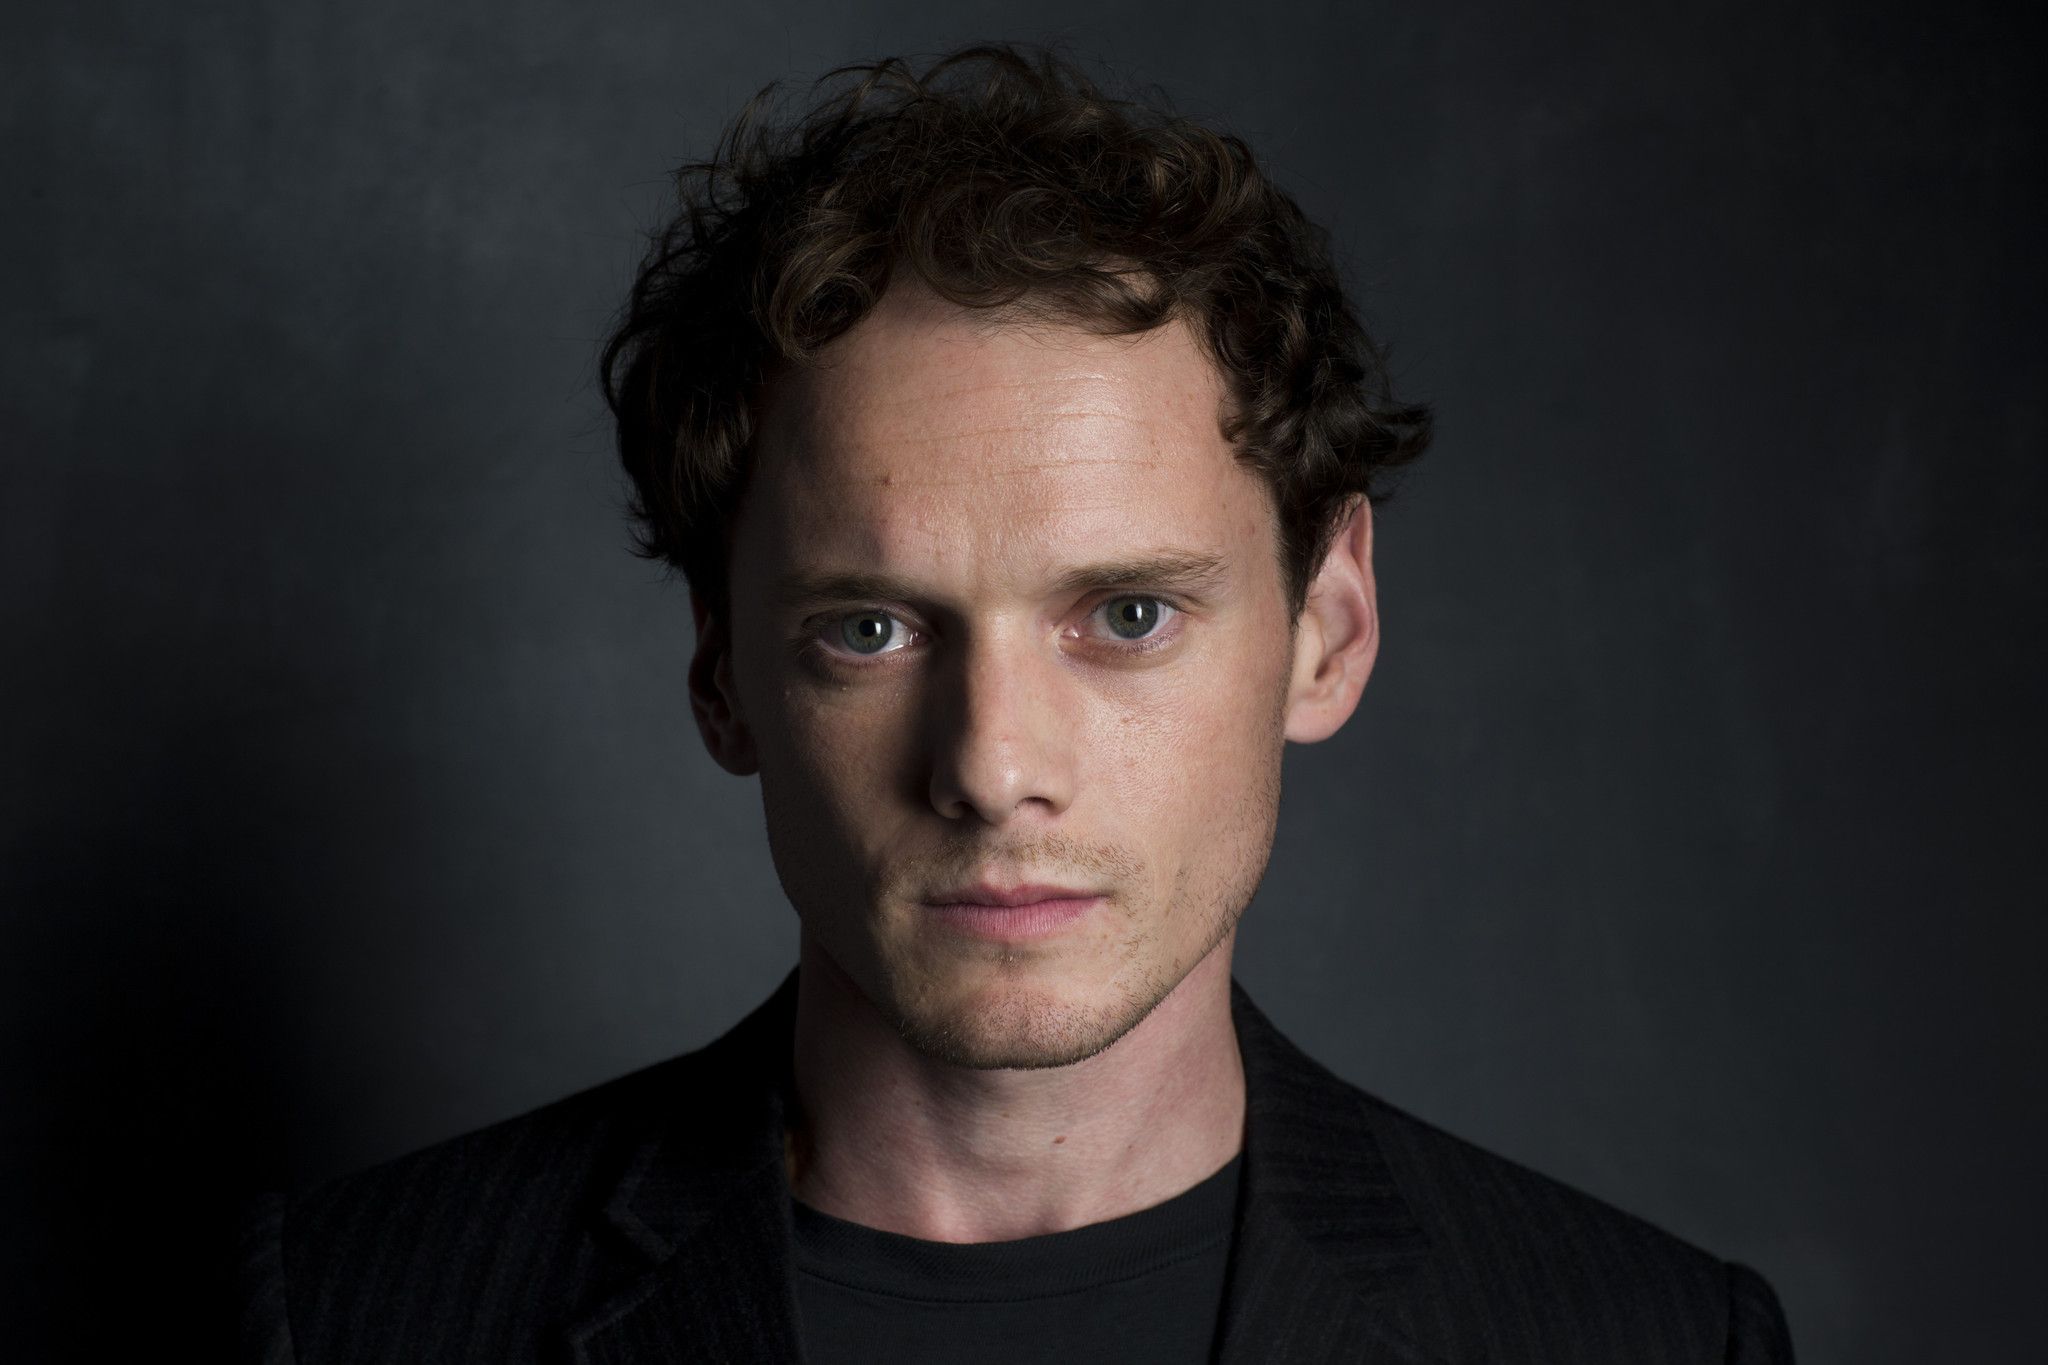 Anton Yelchin's work has been praised as he plays the crafty teen in 'Charlie Bartlett' Morning Call